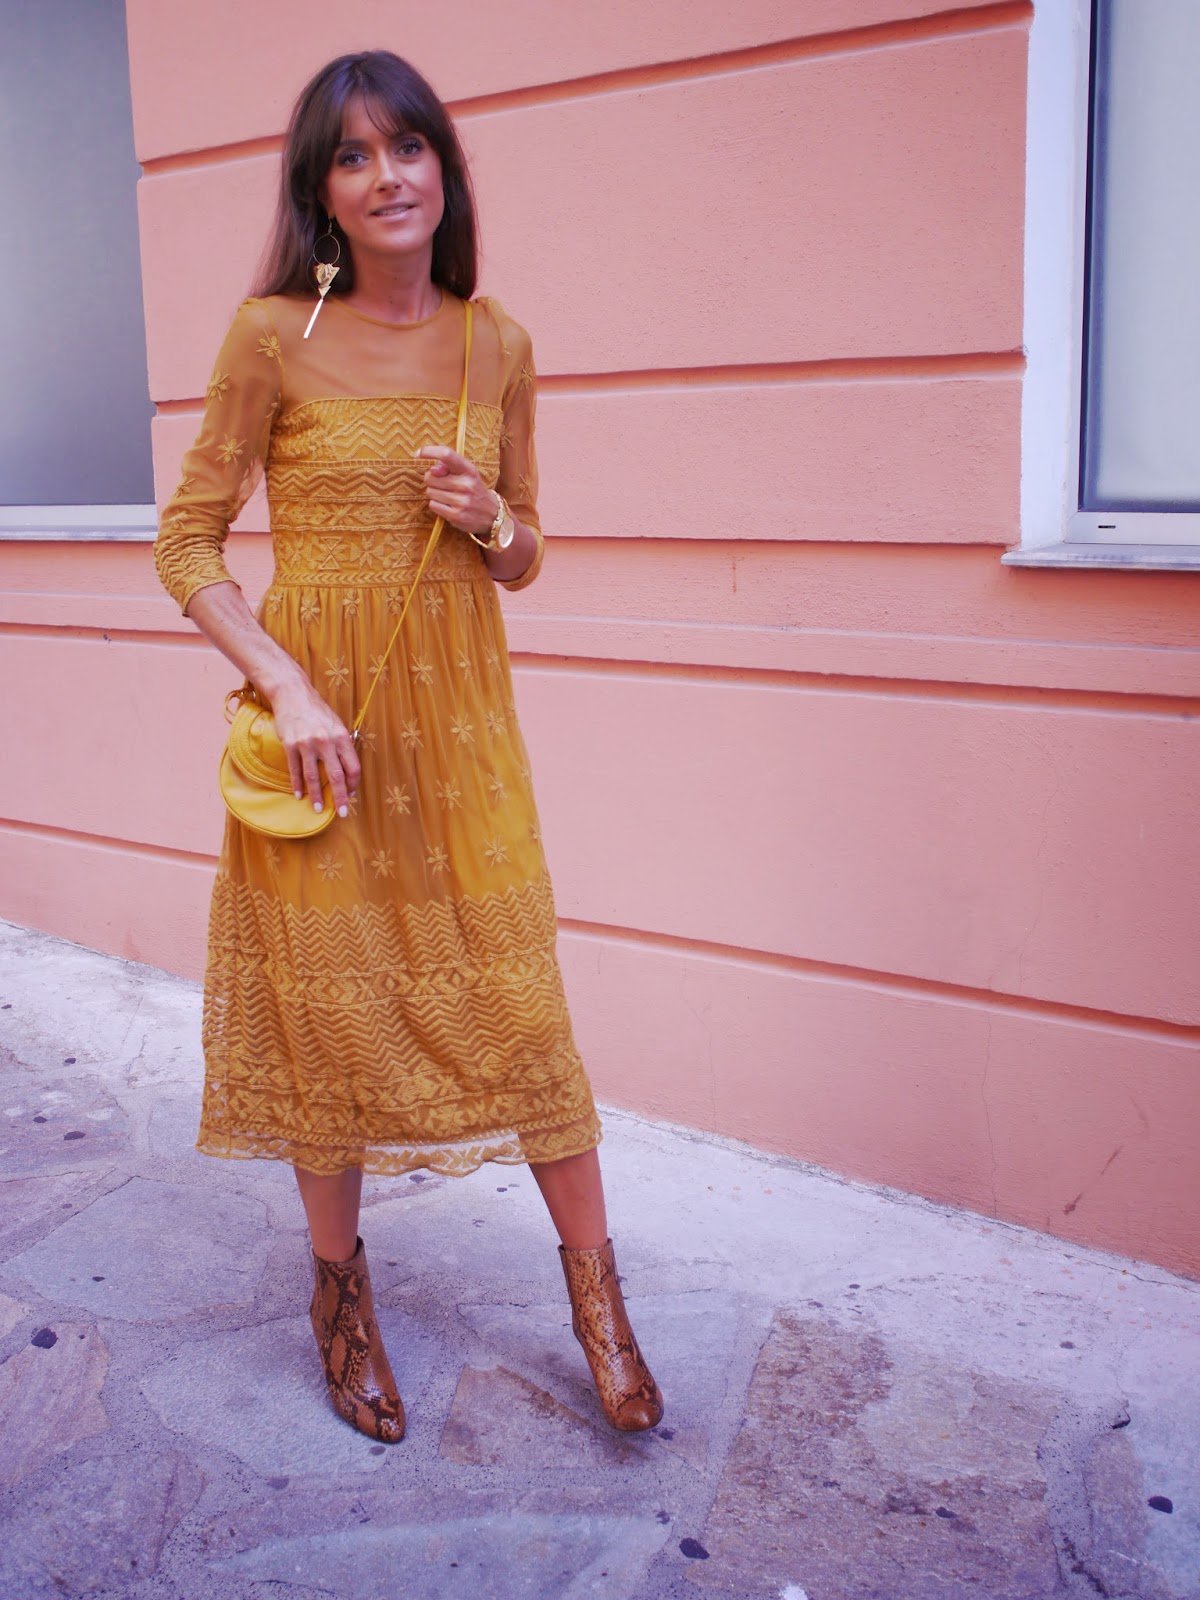 Fashion Musings Diary: Mellow Yellow Lace Dress and Python Boots Monday